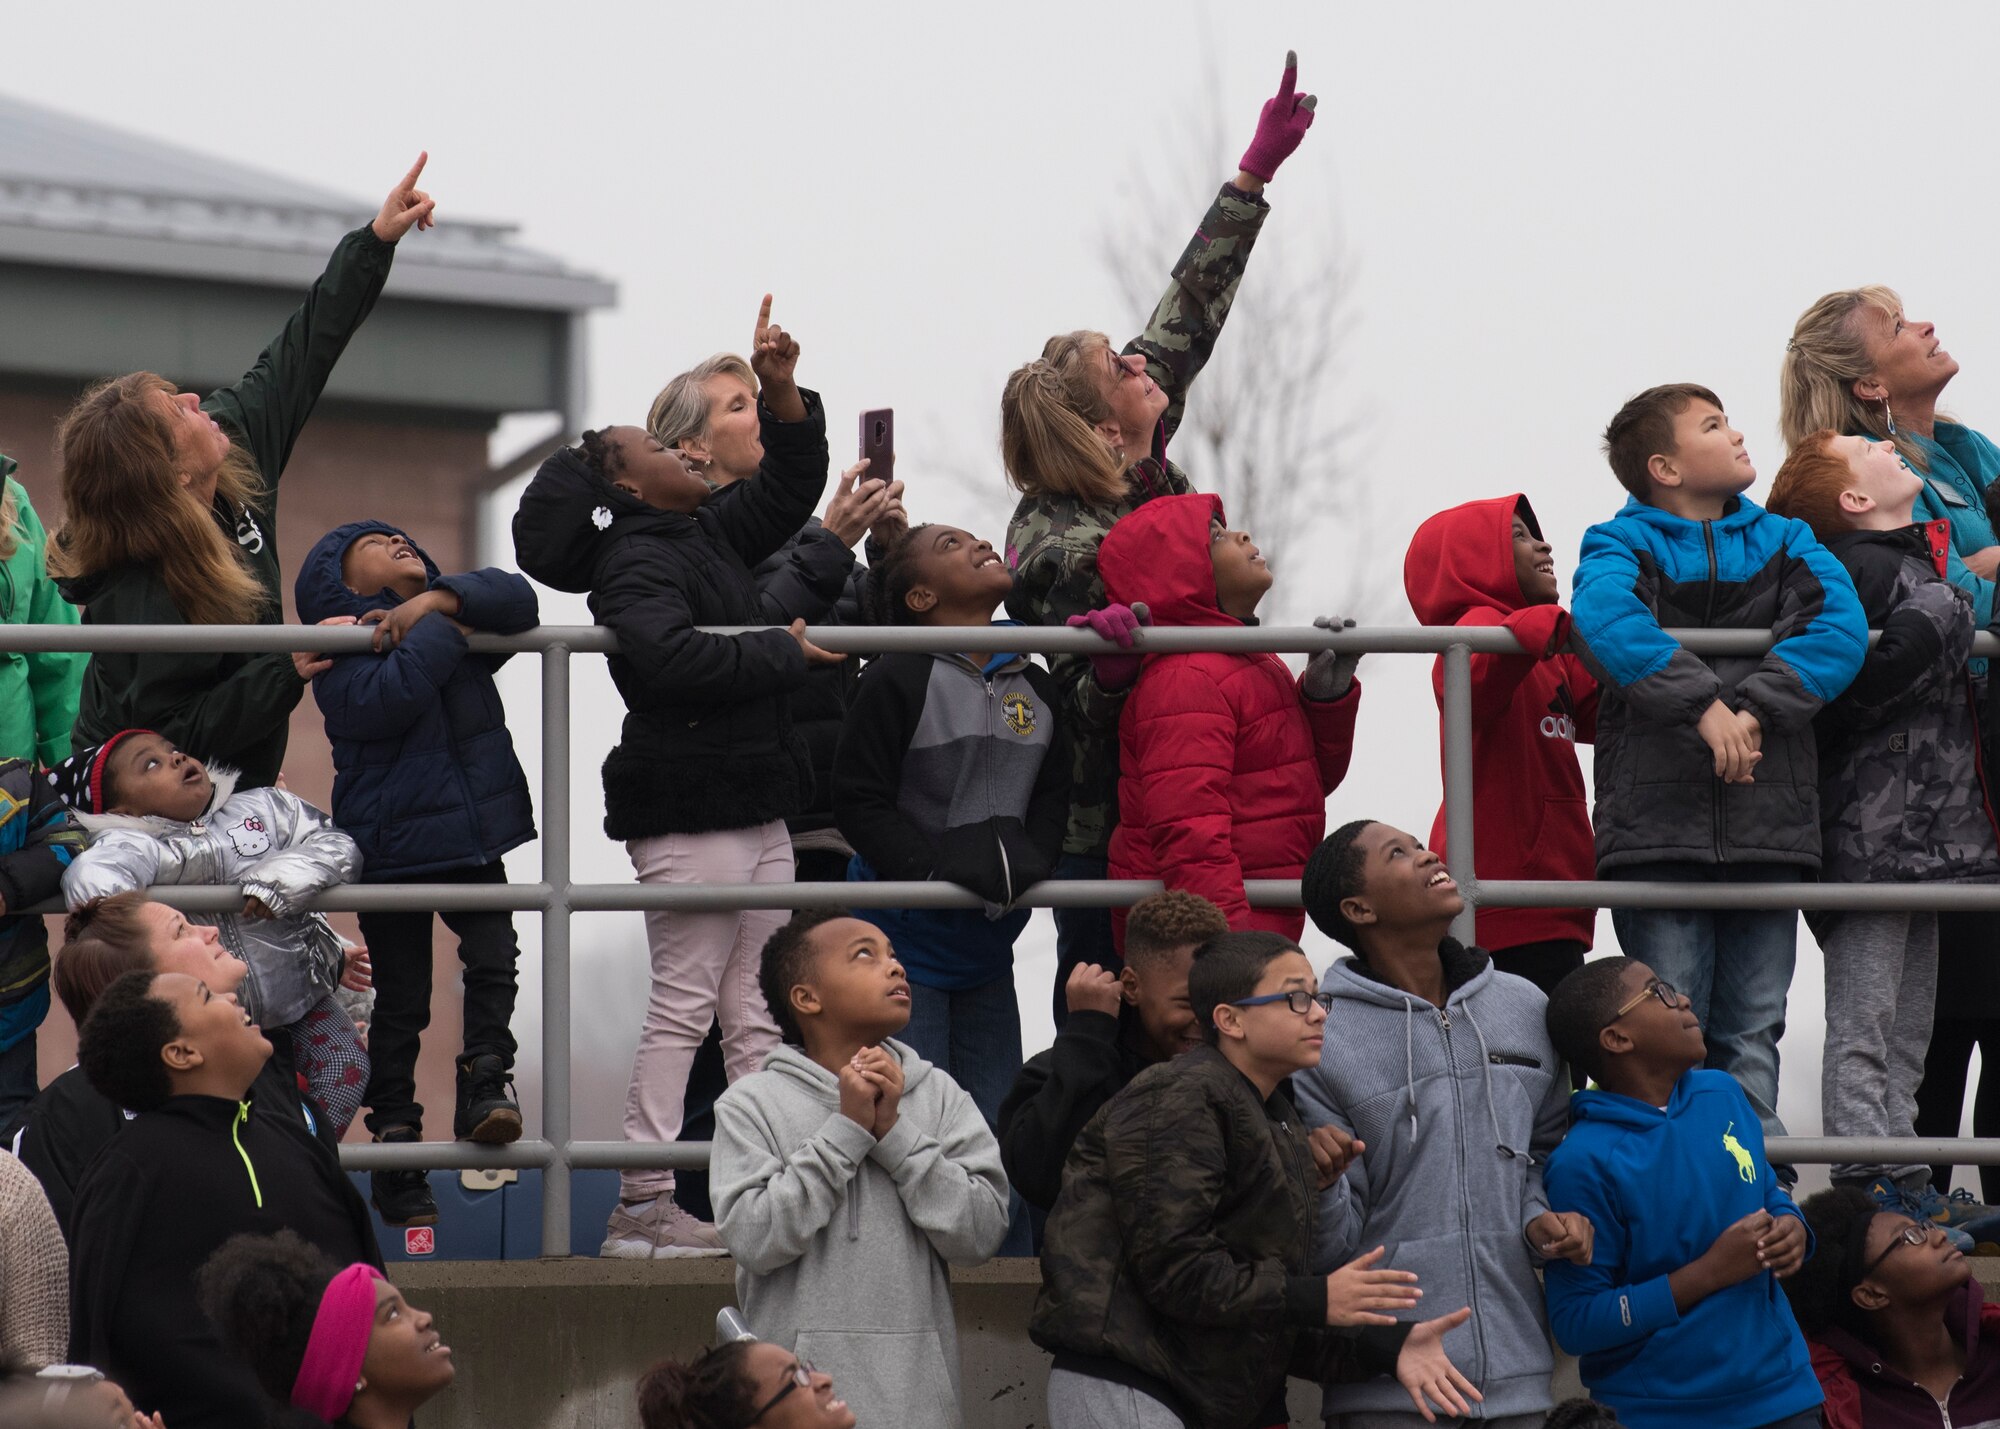 Belle Valley School students watch as a high-altitude computer floats into the sky, Nov. 30, 2018, Belleville, Illinois. Three schools, Emge Junior High School, Smithton Middle School and Belle Valley School, worked together to launch a balloon that carried a high-altitude computer, which analyzed data ranging from altitude and coordinates traveled to temperature and pressure. The students found the popped balloon 140 miles away in Mount Carmel, Illinois. The project made possible through an Air Force science, technology, engineering, and mathematics grant.